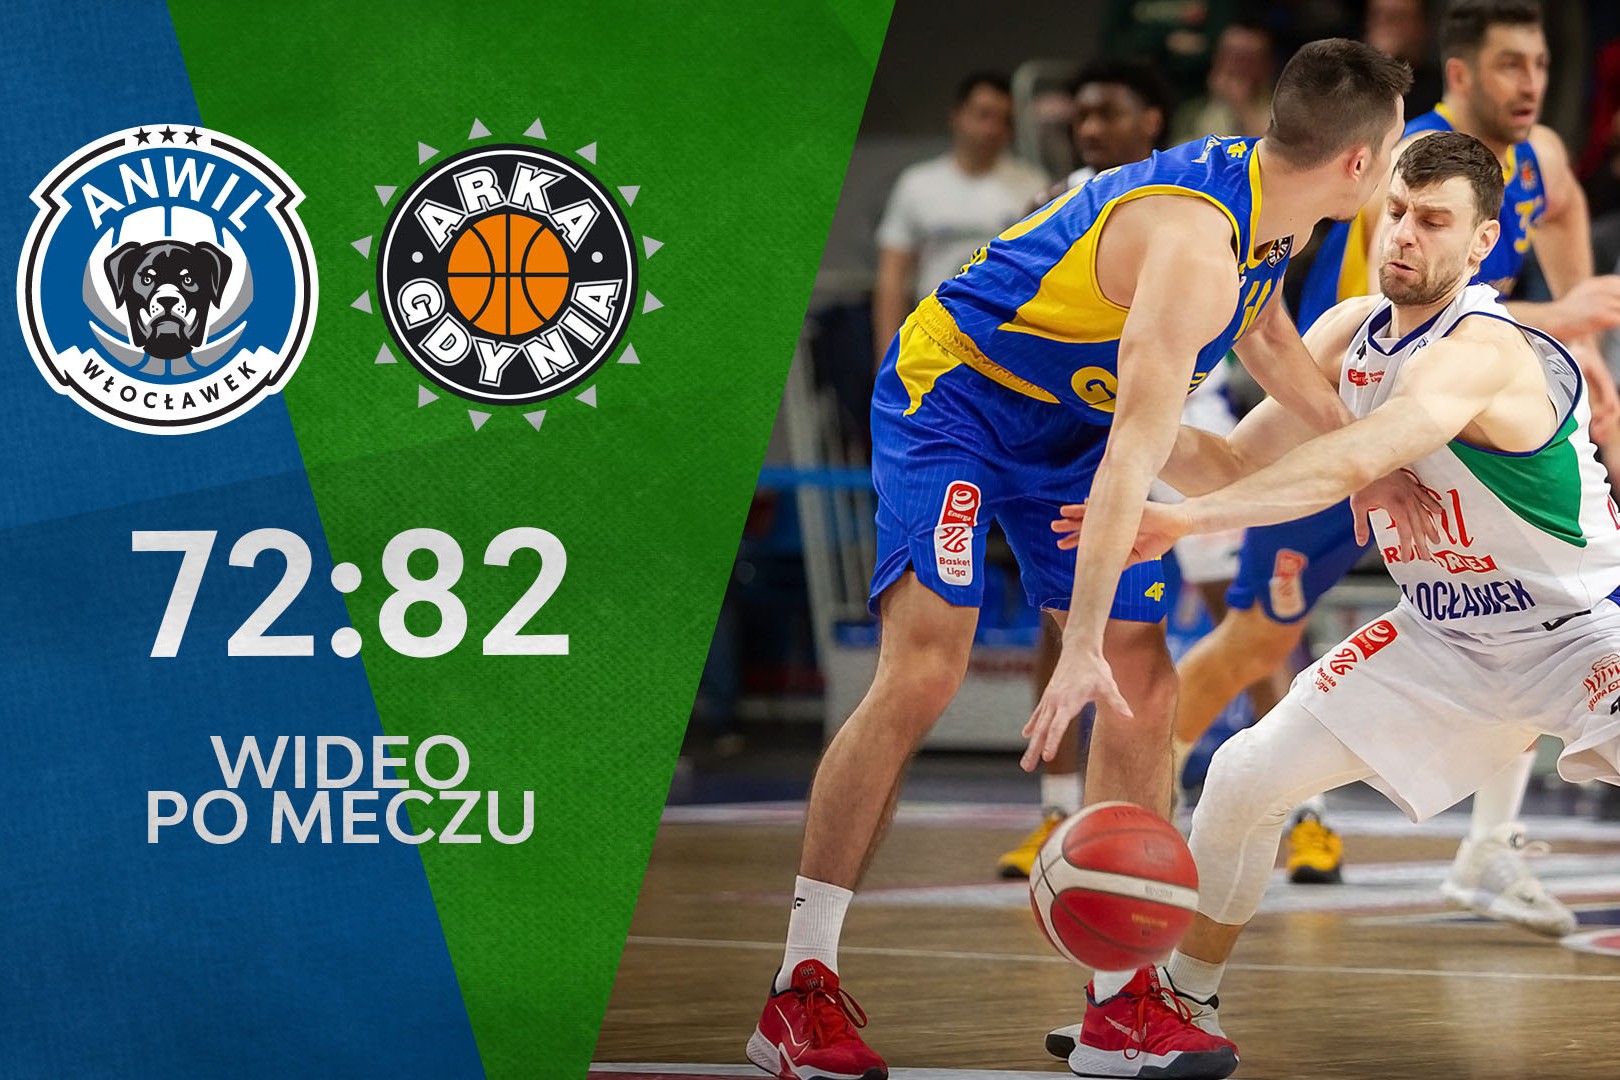 WIDEO | Anwil - Asseco Arka 72:82